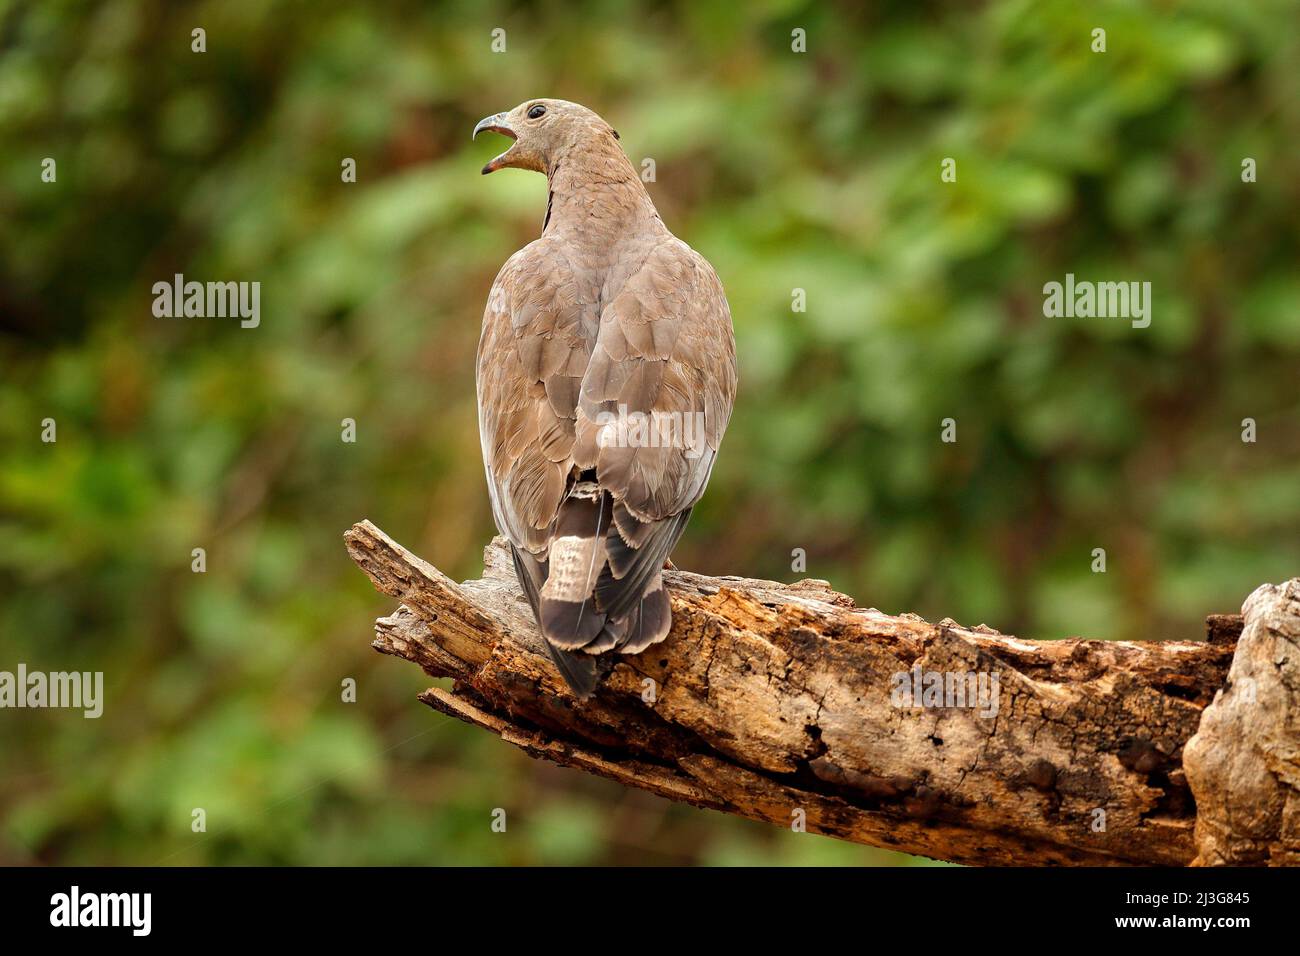 Oriental honey buzzard, Pernis ptilorhynchus, perched on branch in nice morning light against blurred forest in background.  Widlife scene from forest Stock Photo